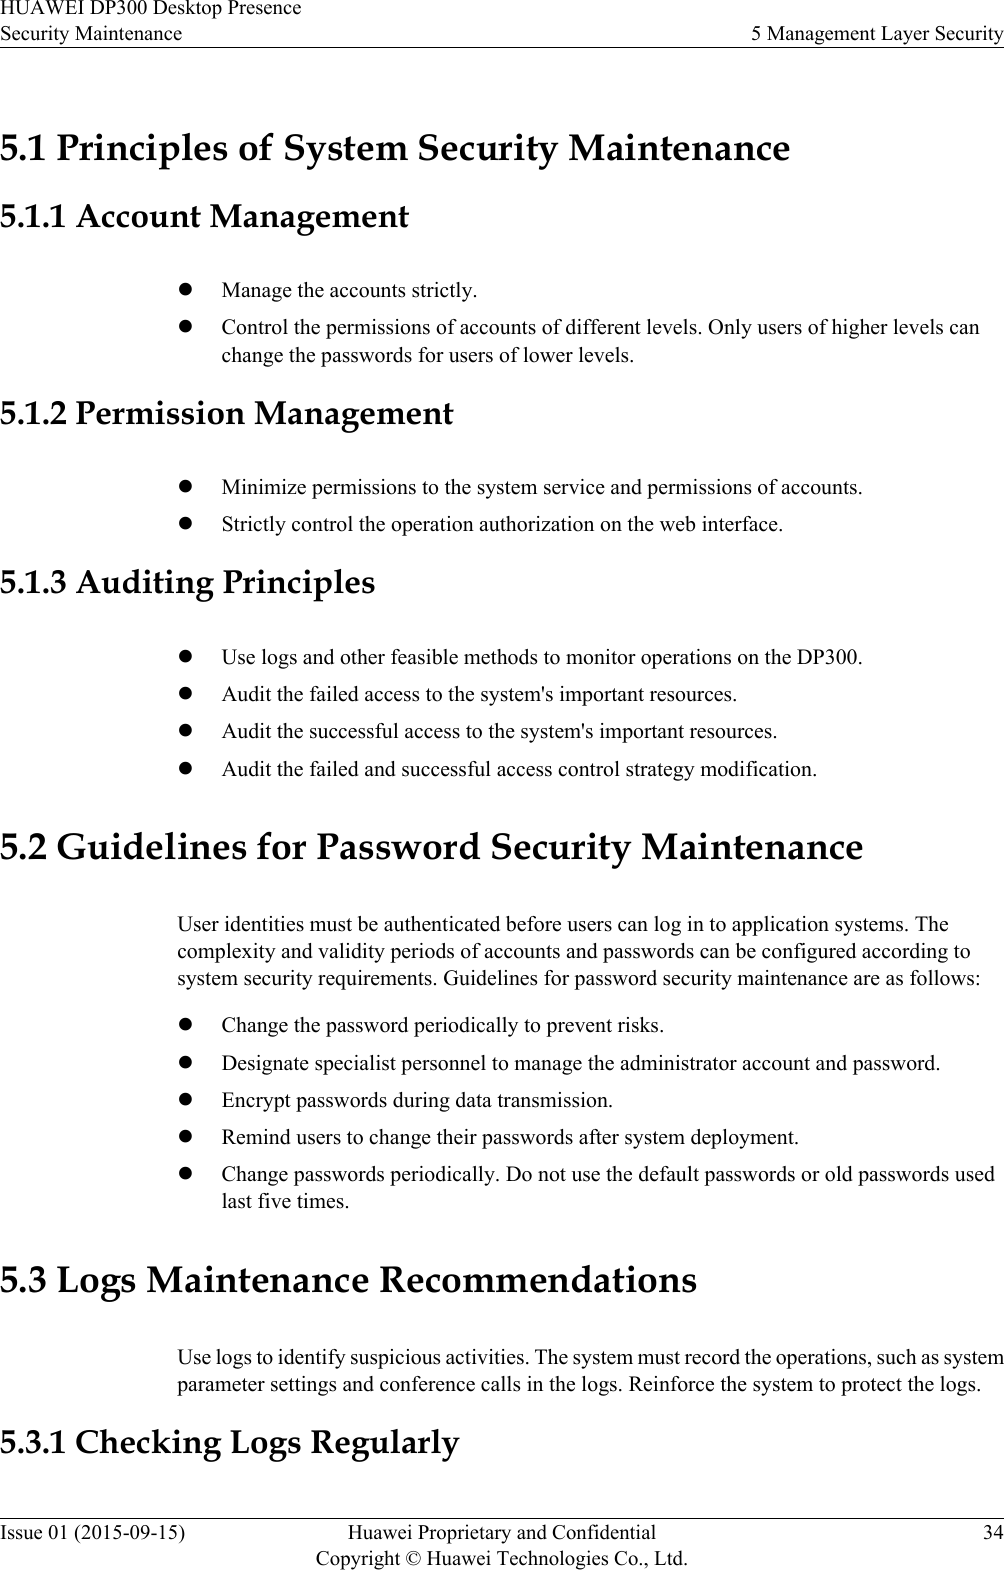 5.1 Principles of System Security Maintenance5.1.1 Account ManagementlManage the accounts strictly.lControl the permissions of accounts of different levels. Only users of higher levels canchange the passwords for users of lower levels.5.1.2 Permission ManagementlMinimize permissions to the system service and permissions of accounts.lStrictly control the operation authorization on the web interface.5.1.3 Auditing PrincipleslUse logs and other feasible methods to monitor operations on the DP300.lAudit the failed access to the system&apos;s important resources.lAudit the successful access to the system&apos;s important resources.lAudit the failed and successful access control strategy modification.5.2 Guidelines for Password Security MaintenanceUser identities must be authenticated before users can log in to application systems. Thecomplexity and validity periods of accounts and passwords can be configured according tosystem security requirements. Guidelines for password security maintenance are as follows:lChange the password periodically to prevent risks.lDesignate specialist personnel to manage the administrator account and password.lEncrypt passwords during data transmission.lRemind users to change their passwords after system deployment.lChange passwords periodically. Do not use the default passwords or old passwords usedlast five times.5.3 Logs Maintenance RecommendationsUse logs to identify suspicious activities. The system must record the operations, such as systemparameter settings and conference calls in the logs. Reinforce the system to protect the logs.5.3.1 Checking Logs RegularlyHUAWEI DP300 Desktop PresenceSecurity Maintenance 5 Management Layer SecurityIssue 01 (2015-09-15) Huawei Proprietary and ConfidentialCopyright © Huawei Technologies Co., Ltd.34